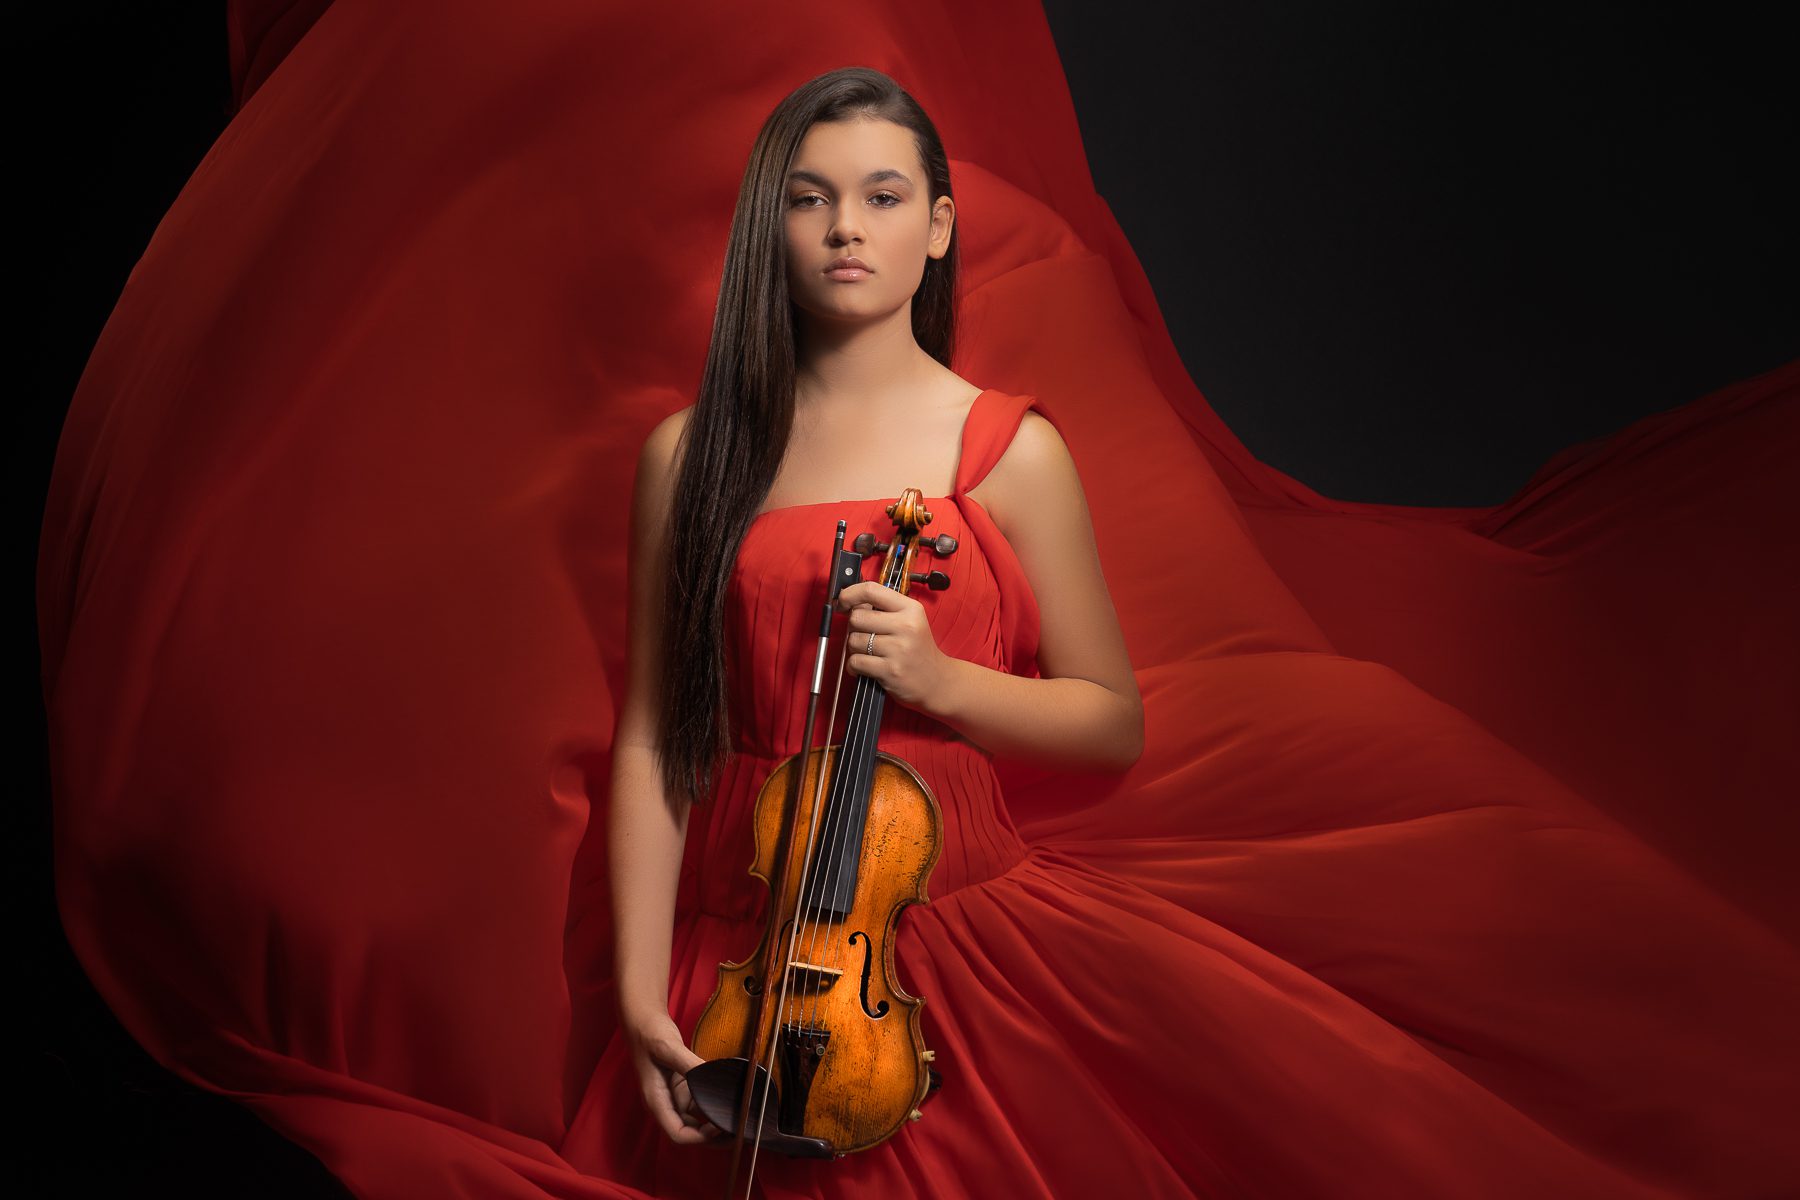 creative photoshoot with female violinist in red dress with violin